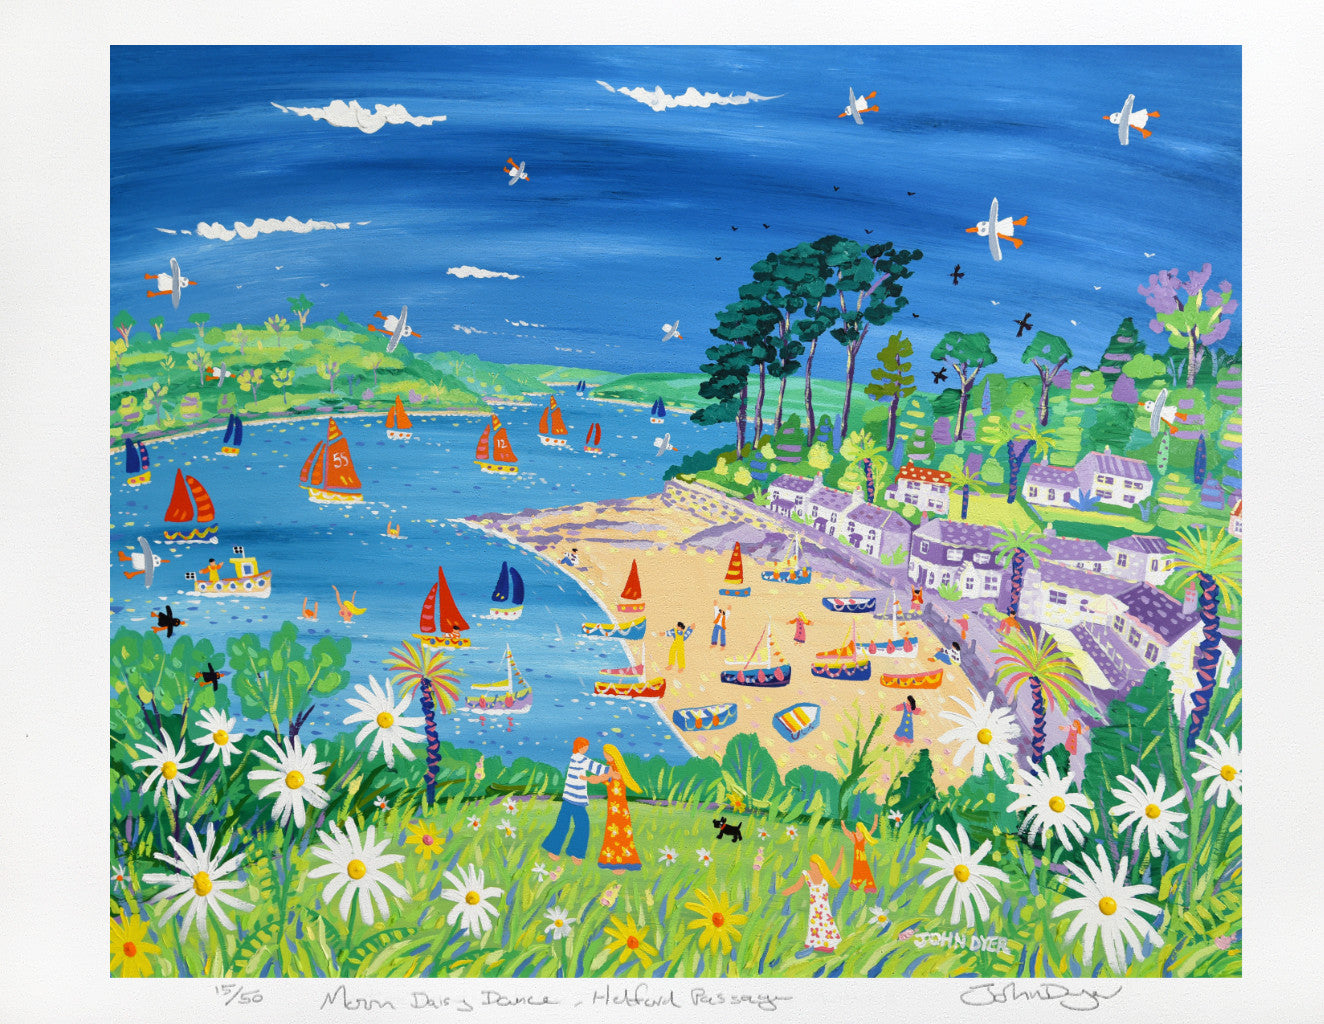 Signed Limited Edition Print by John Dyer. Moon Daisy Dance, Helford Passage